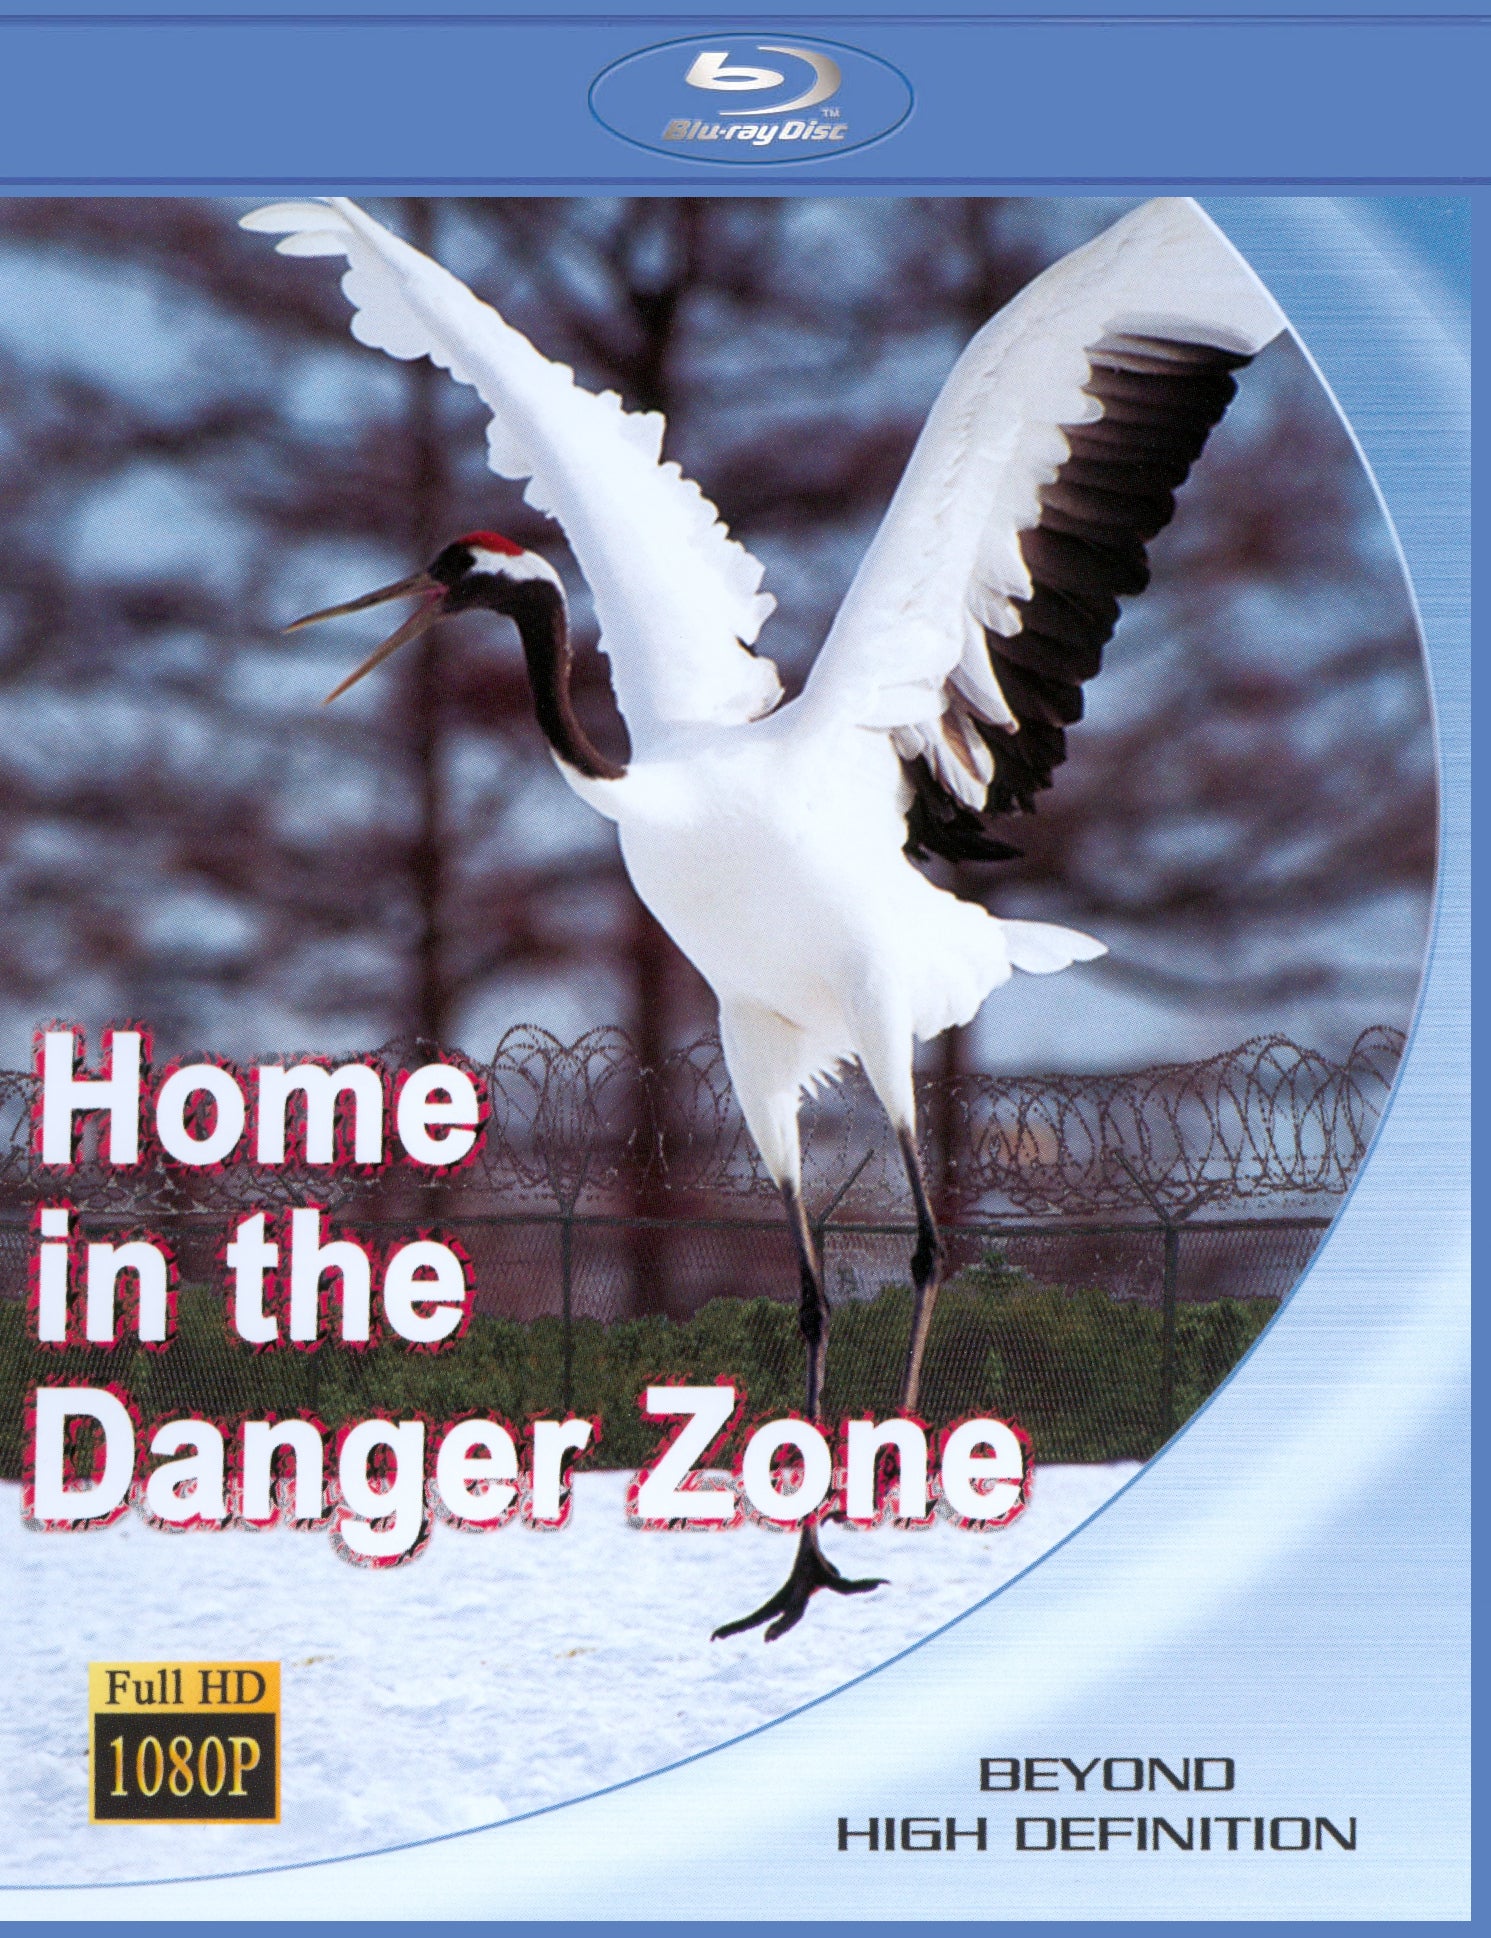 Home in the Danger Zone [Blu-ray] cover art